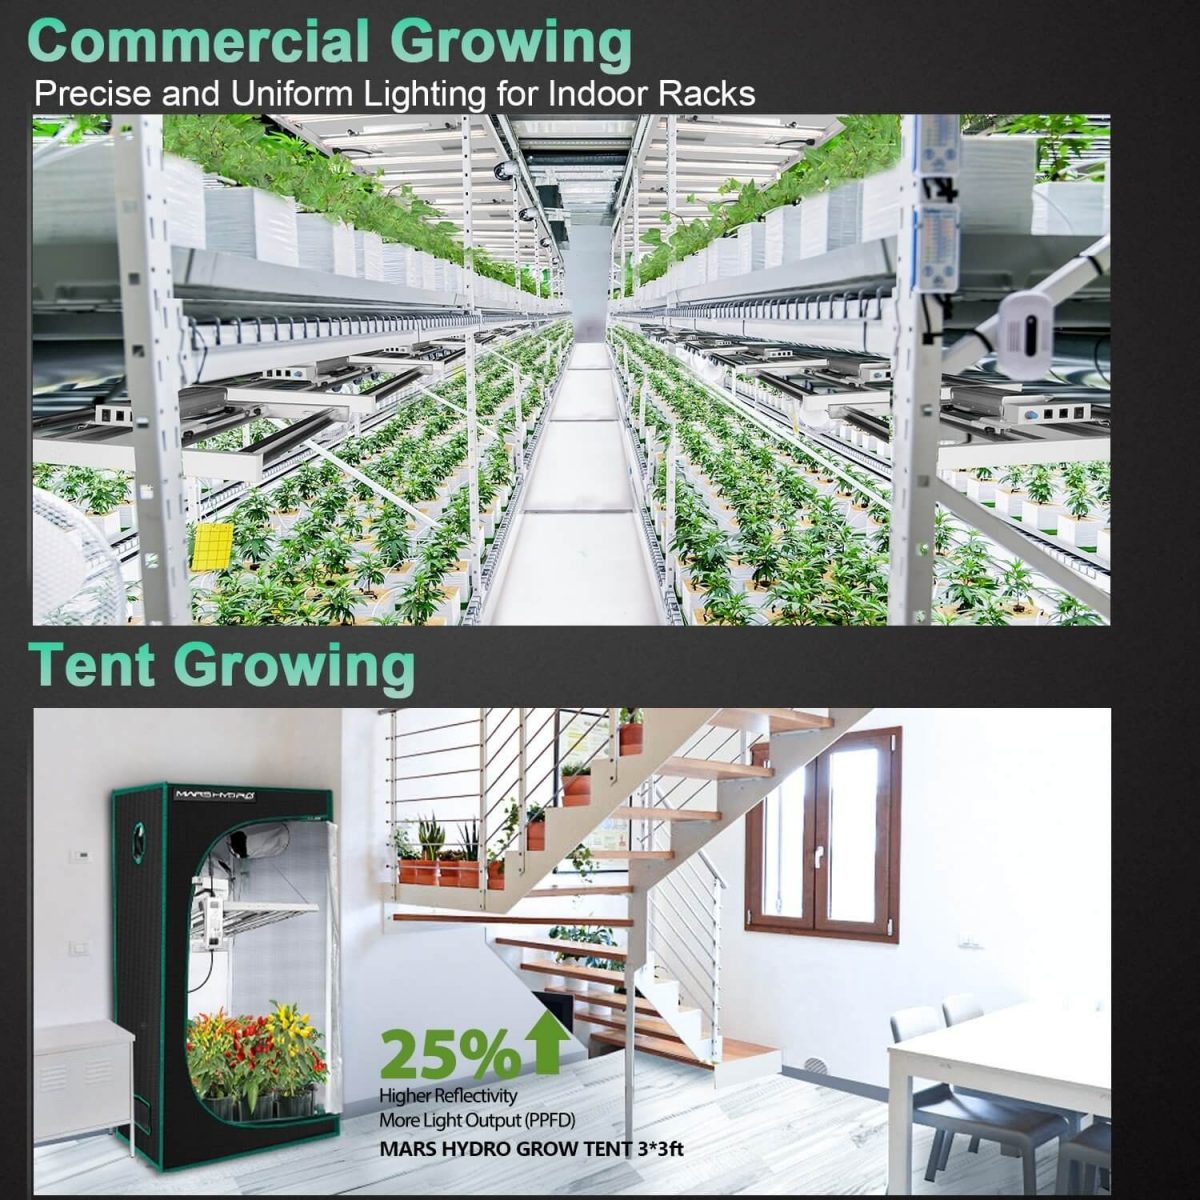 Mars Hydro FC-E3000 has uniform PPFD that is optimal for vertical farming. The best 3'x3' commercial led grow lights.